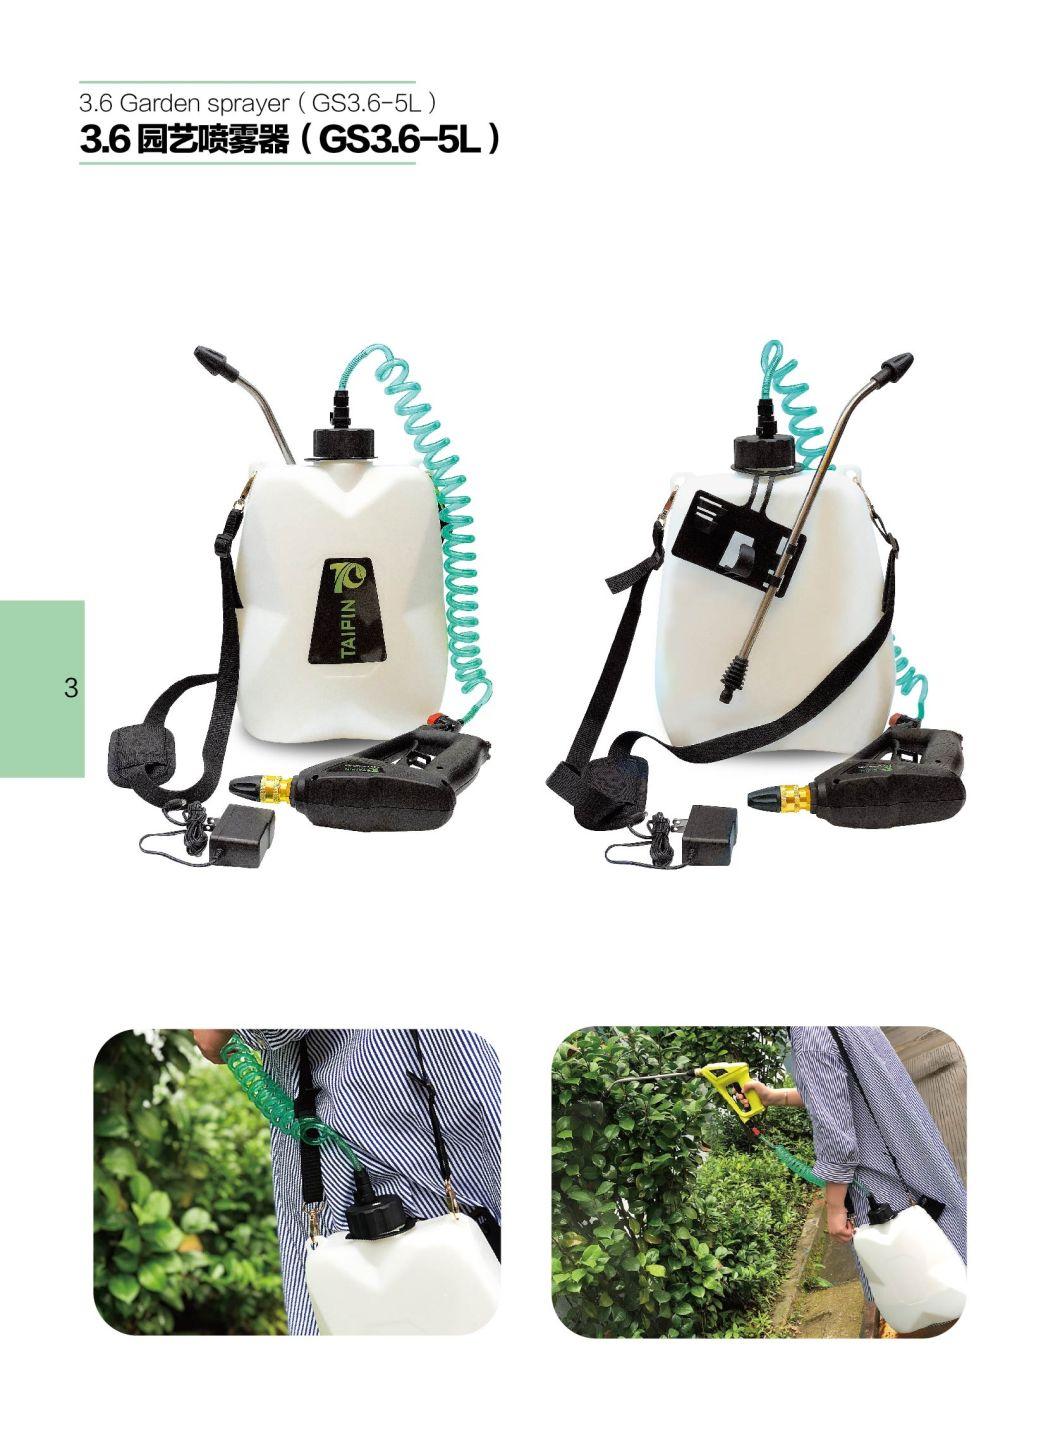 Portable Backpack Fogger Supplier Mosquito Mist Duster Blower Atomizer LV Sprayer Cold Fogging Machine Sprayer Disinfection 5L